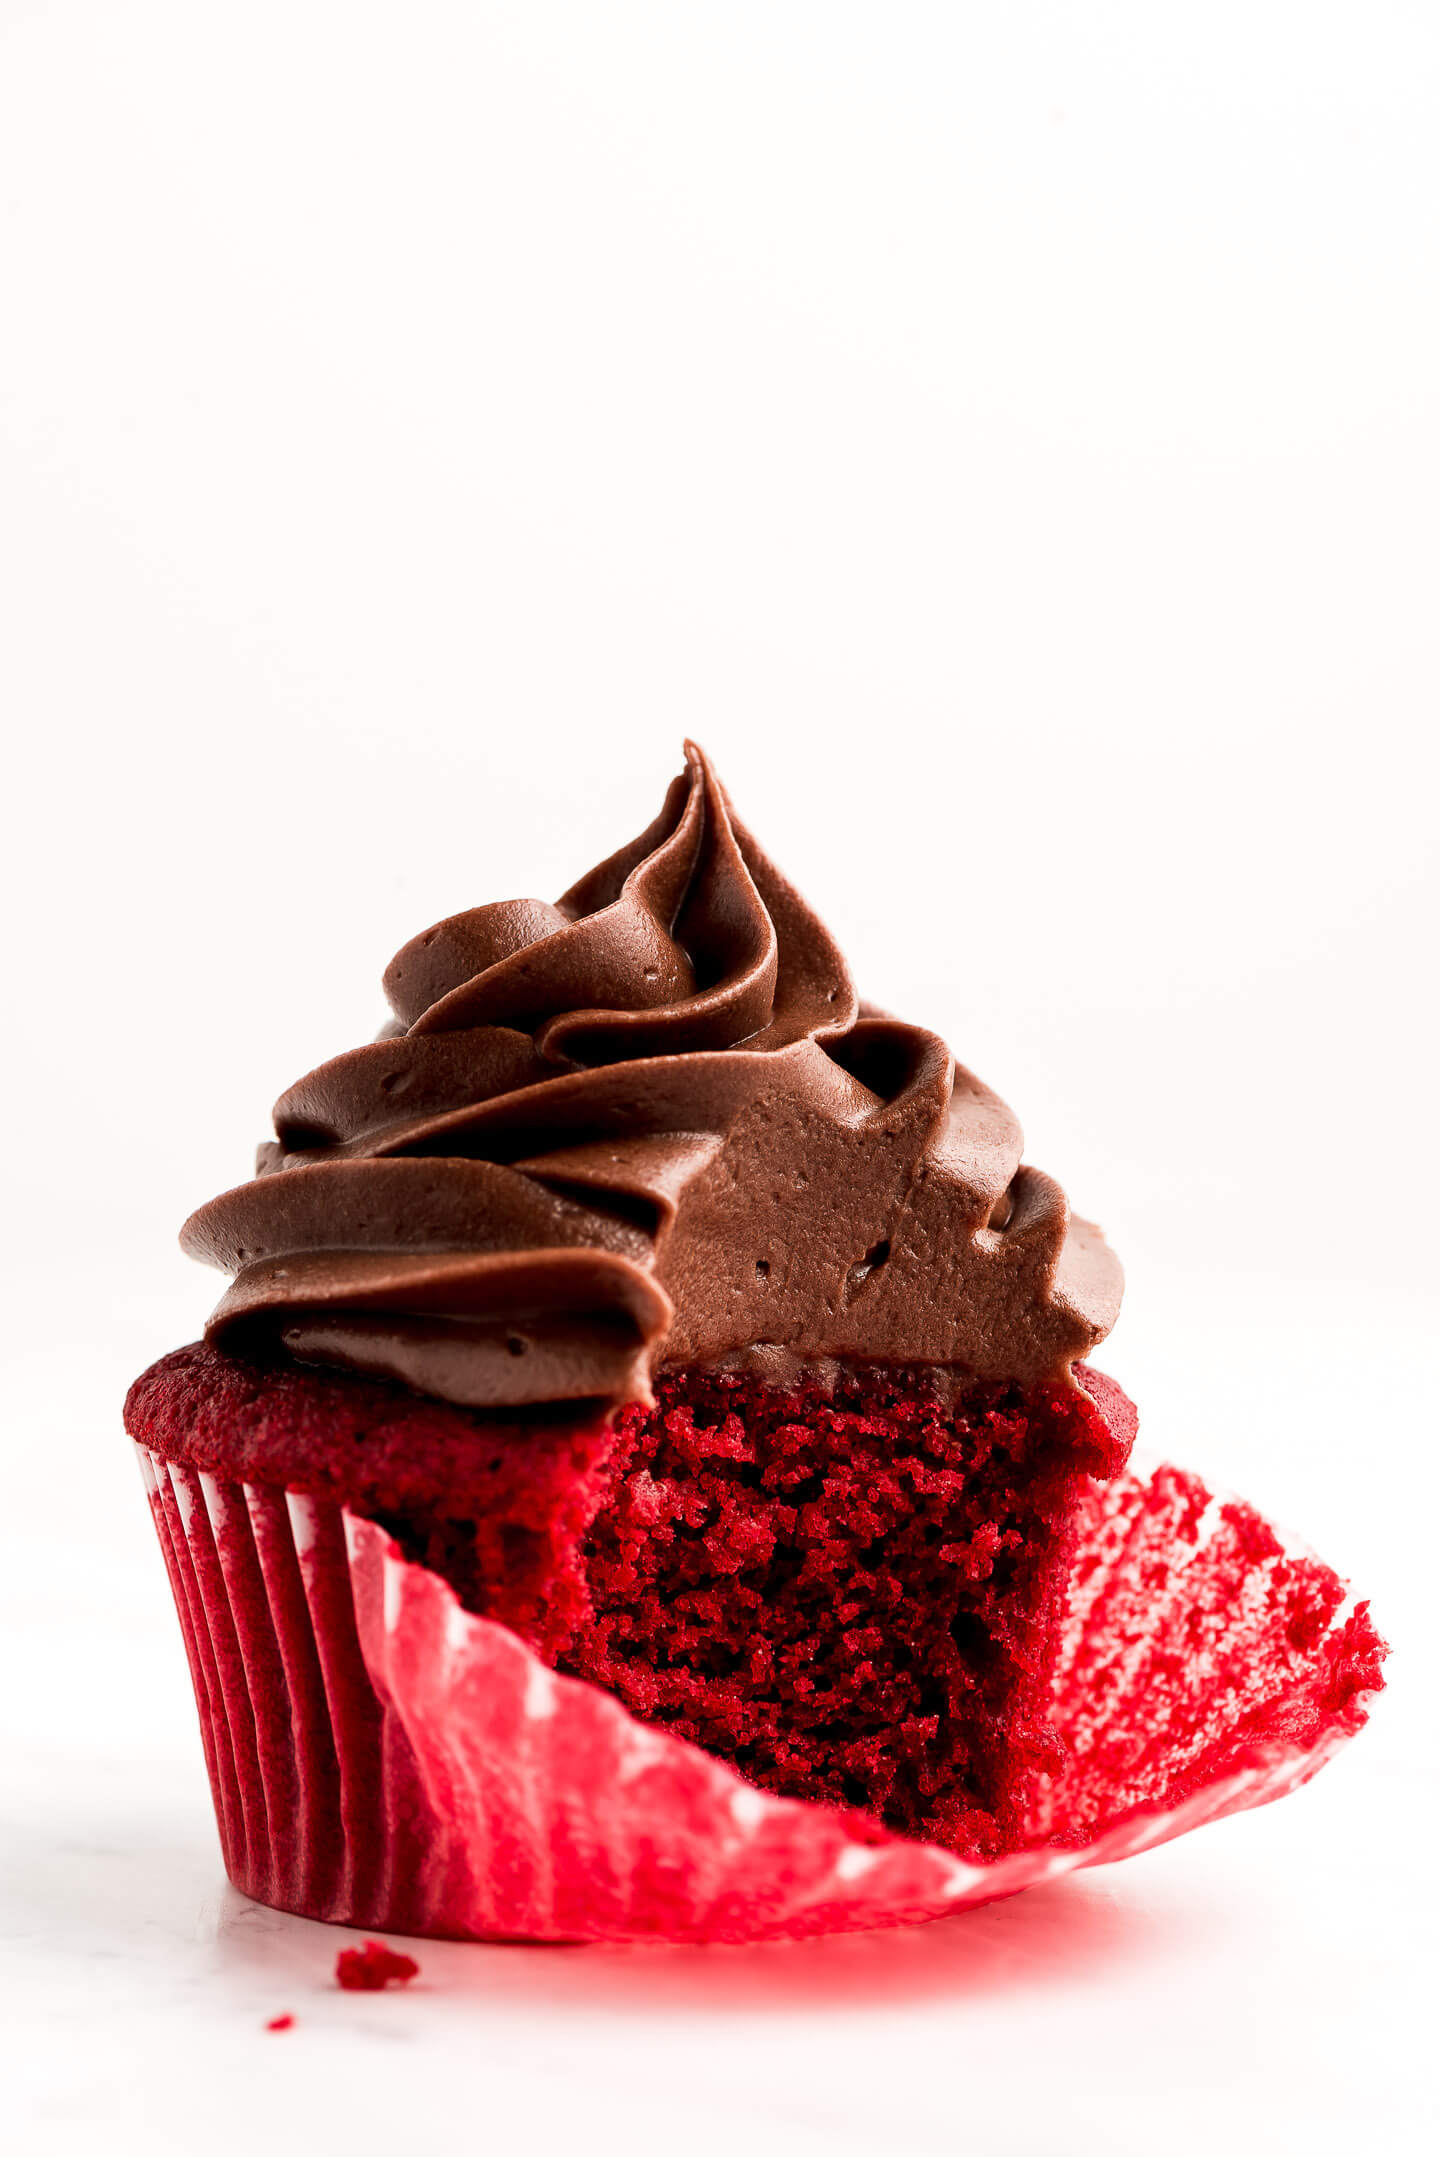 Red Velvet Cupcake with Chocolate Frosting with a bite take out.